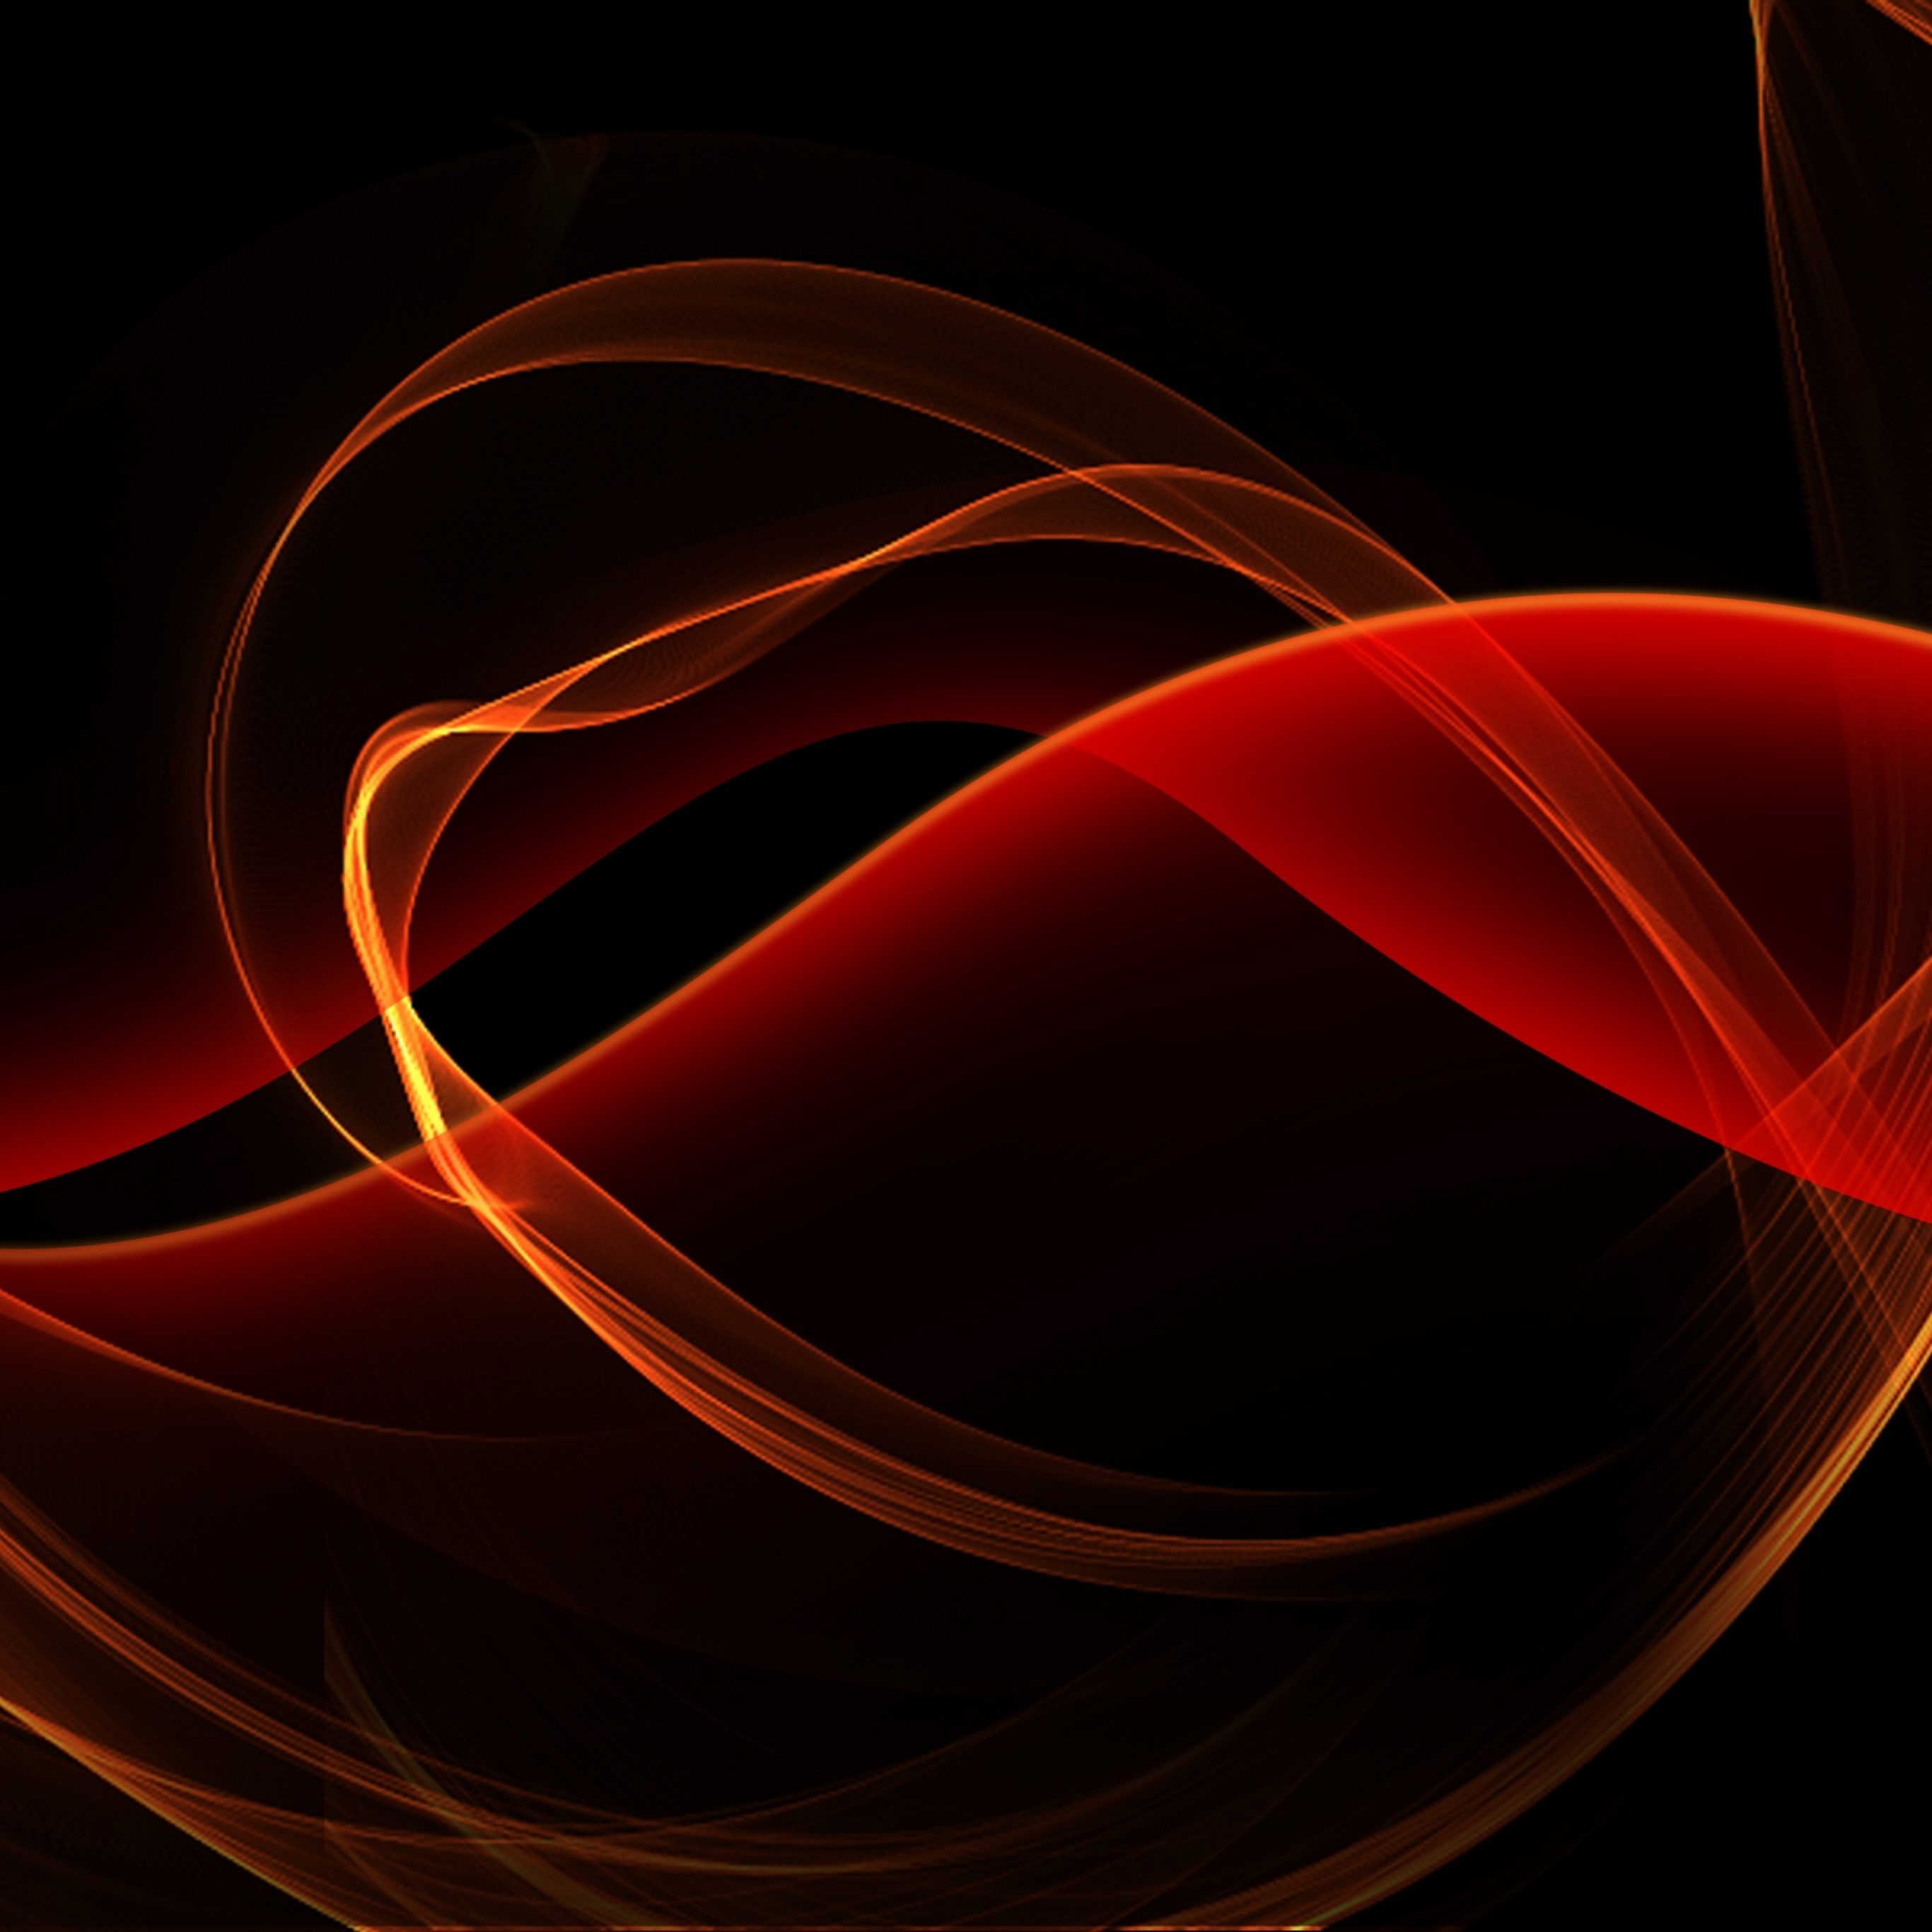 iPad Pro 12.9 wallpapers Black and Red Glowing Curves iPad Wallpaper